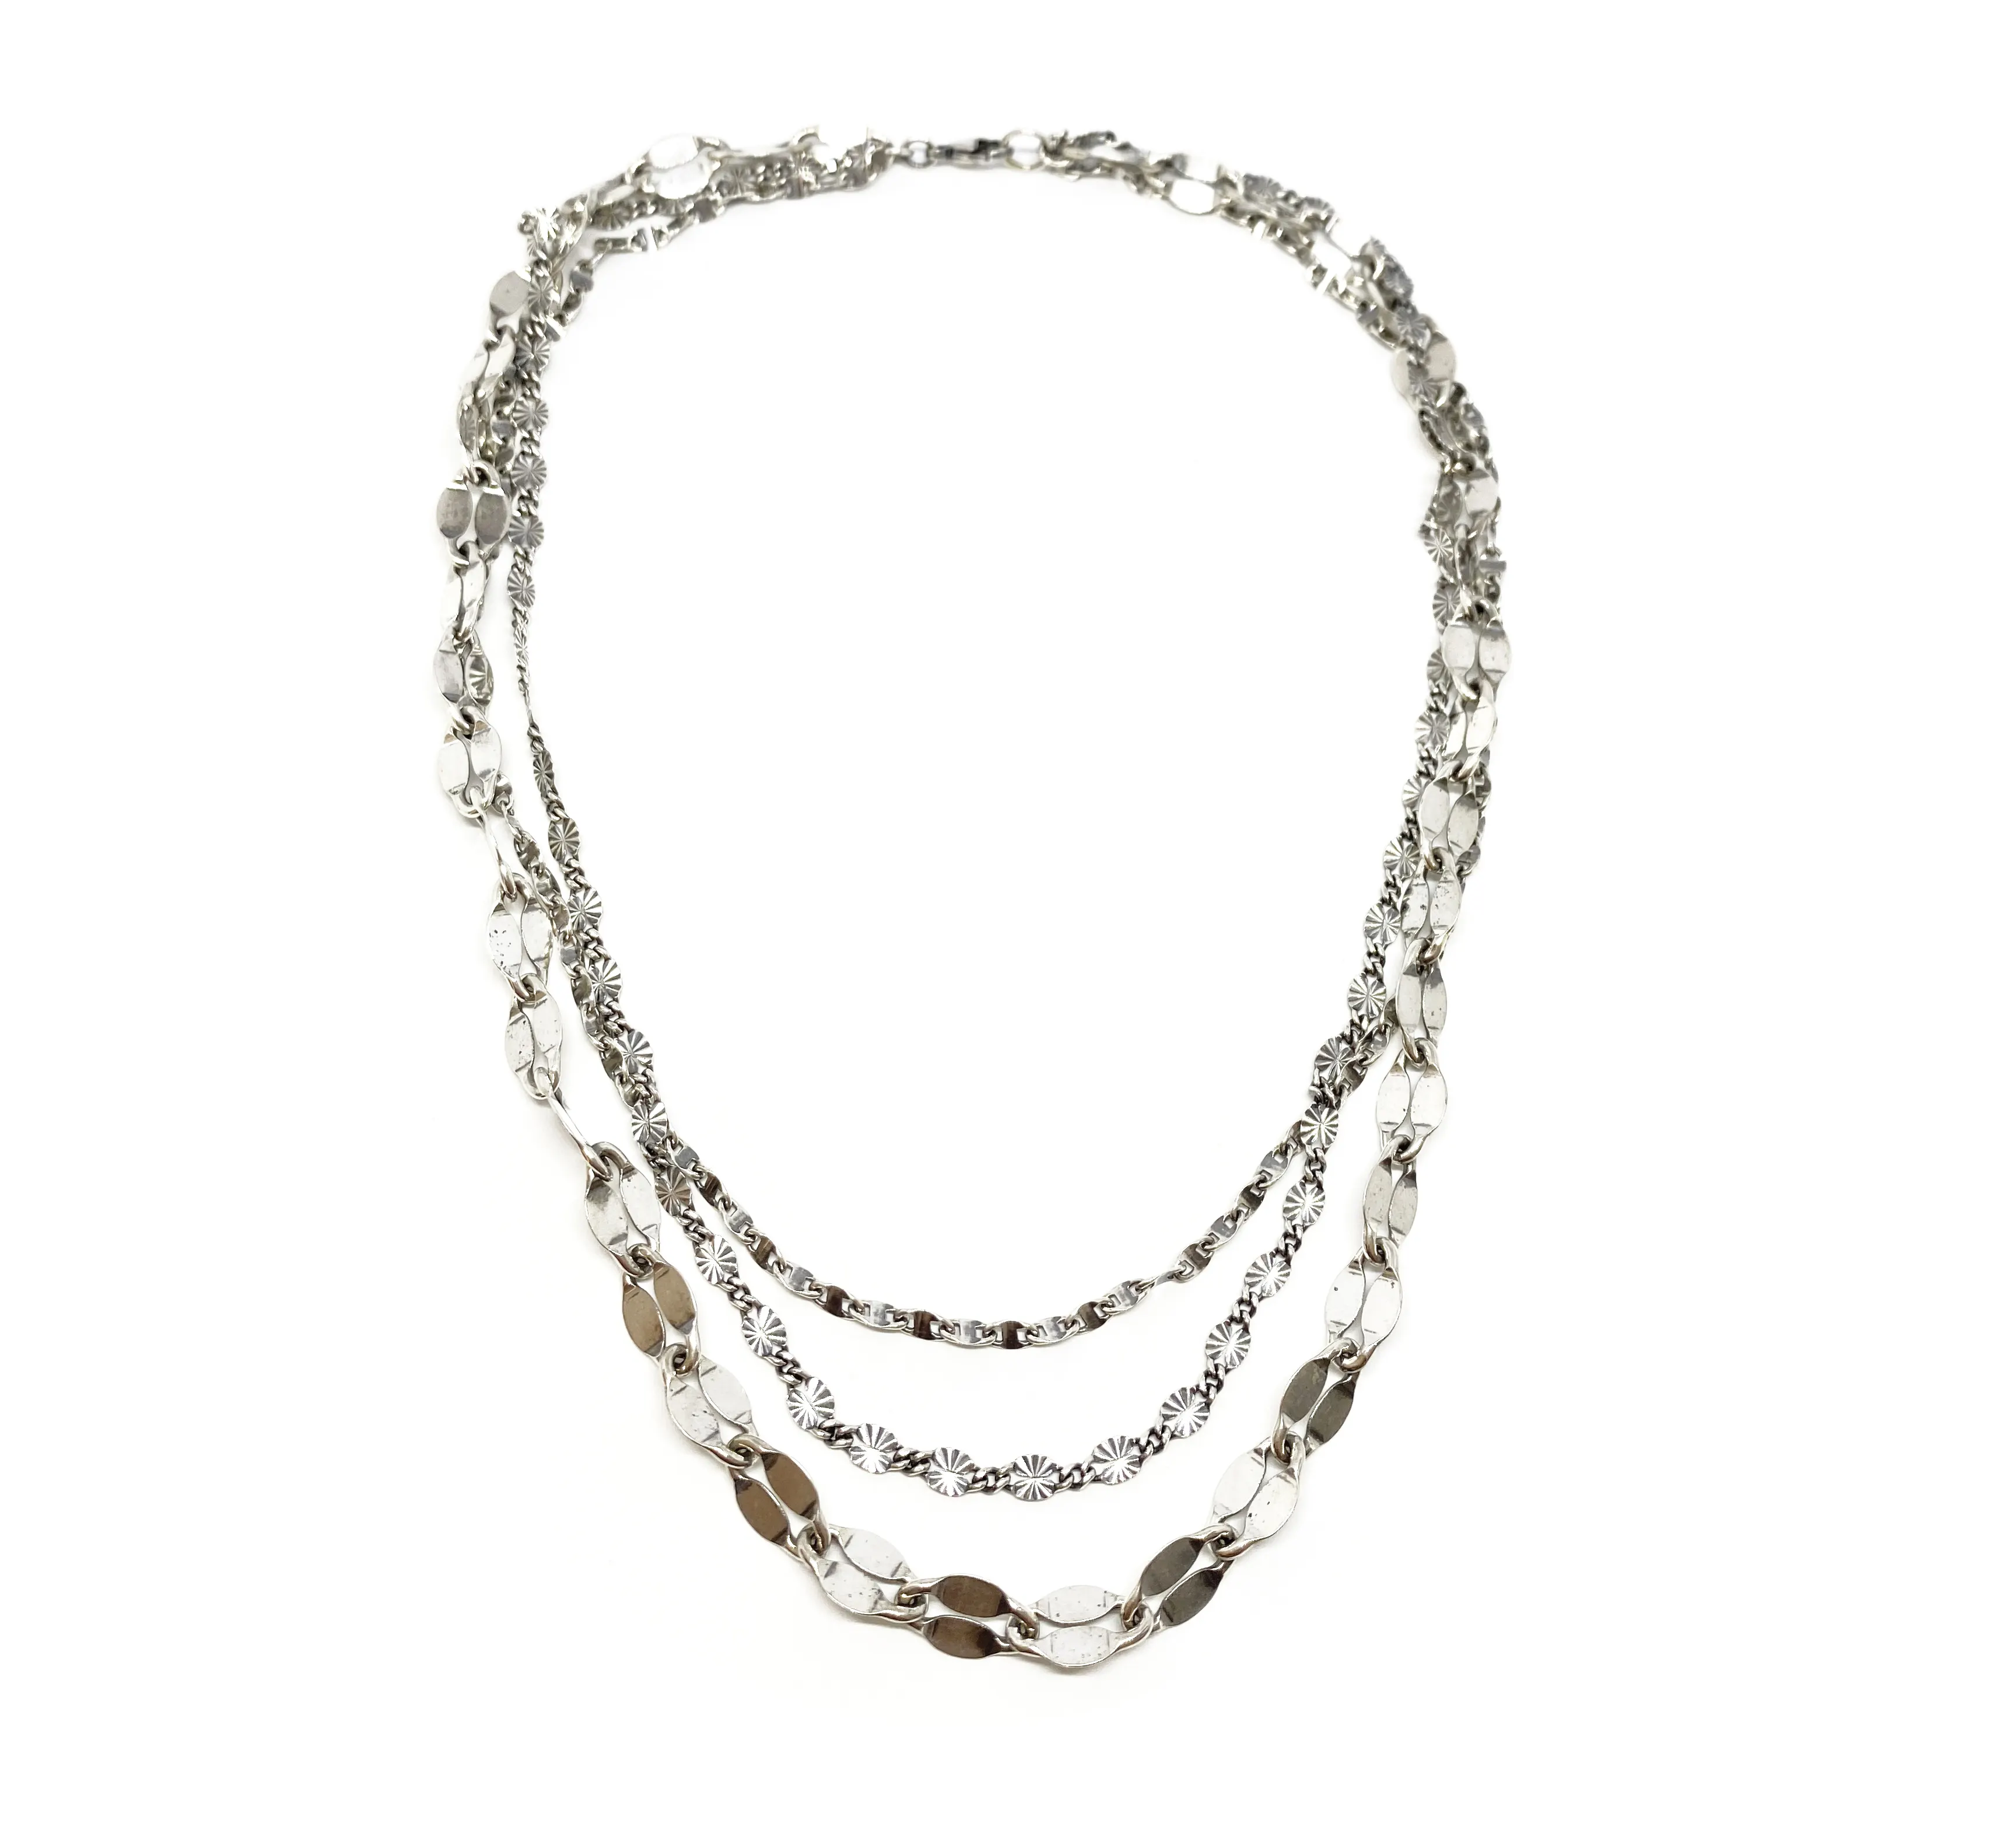 High Quality Silver 925 Chains necklace Women Gift Party Trendy